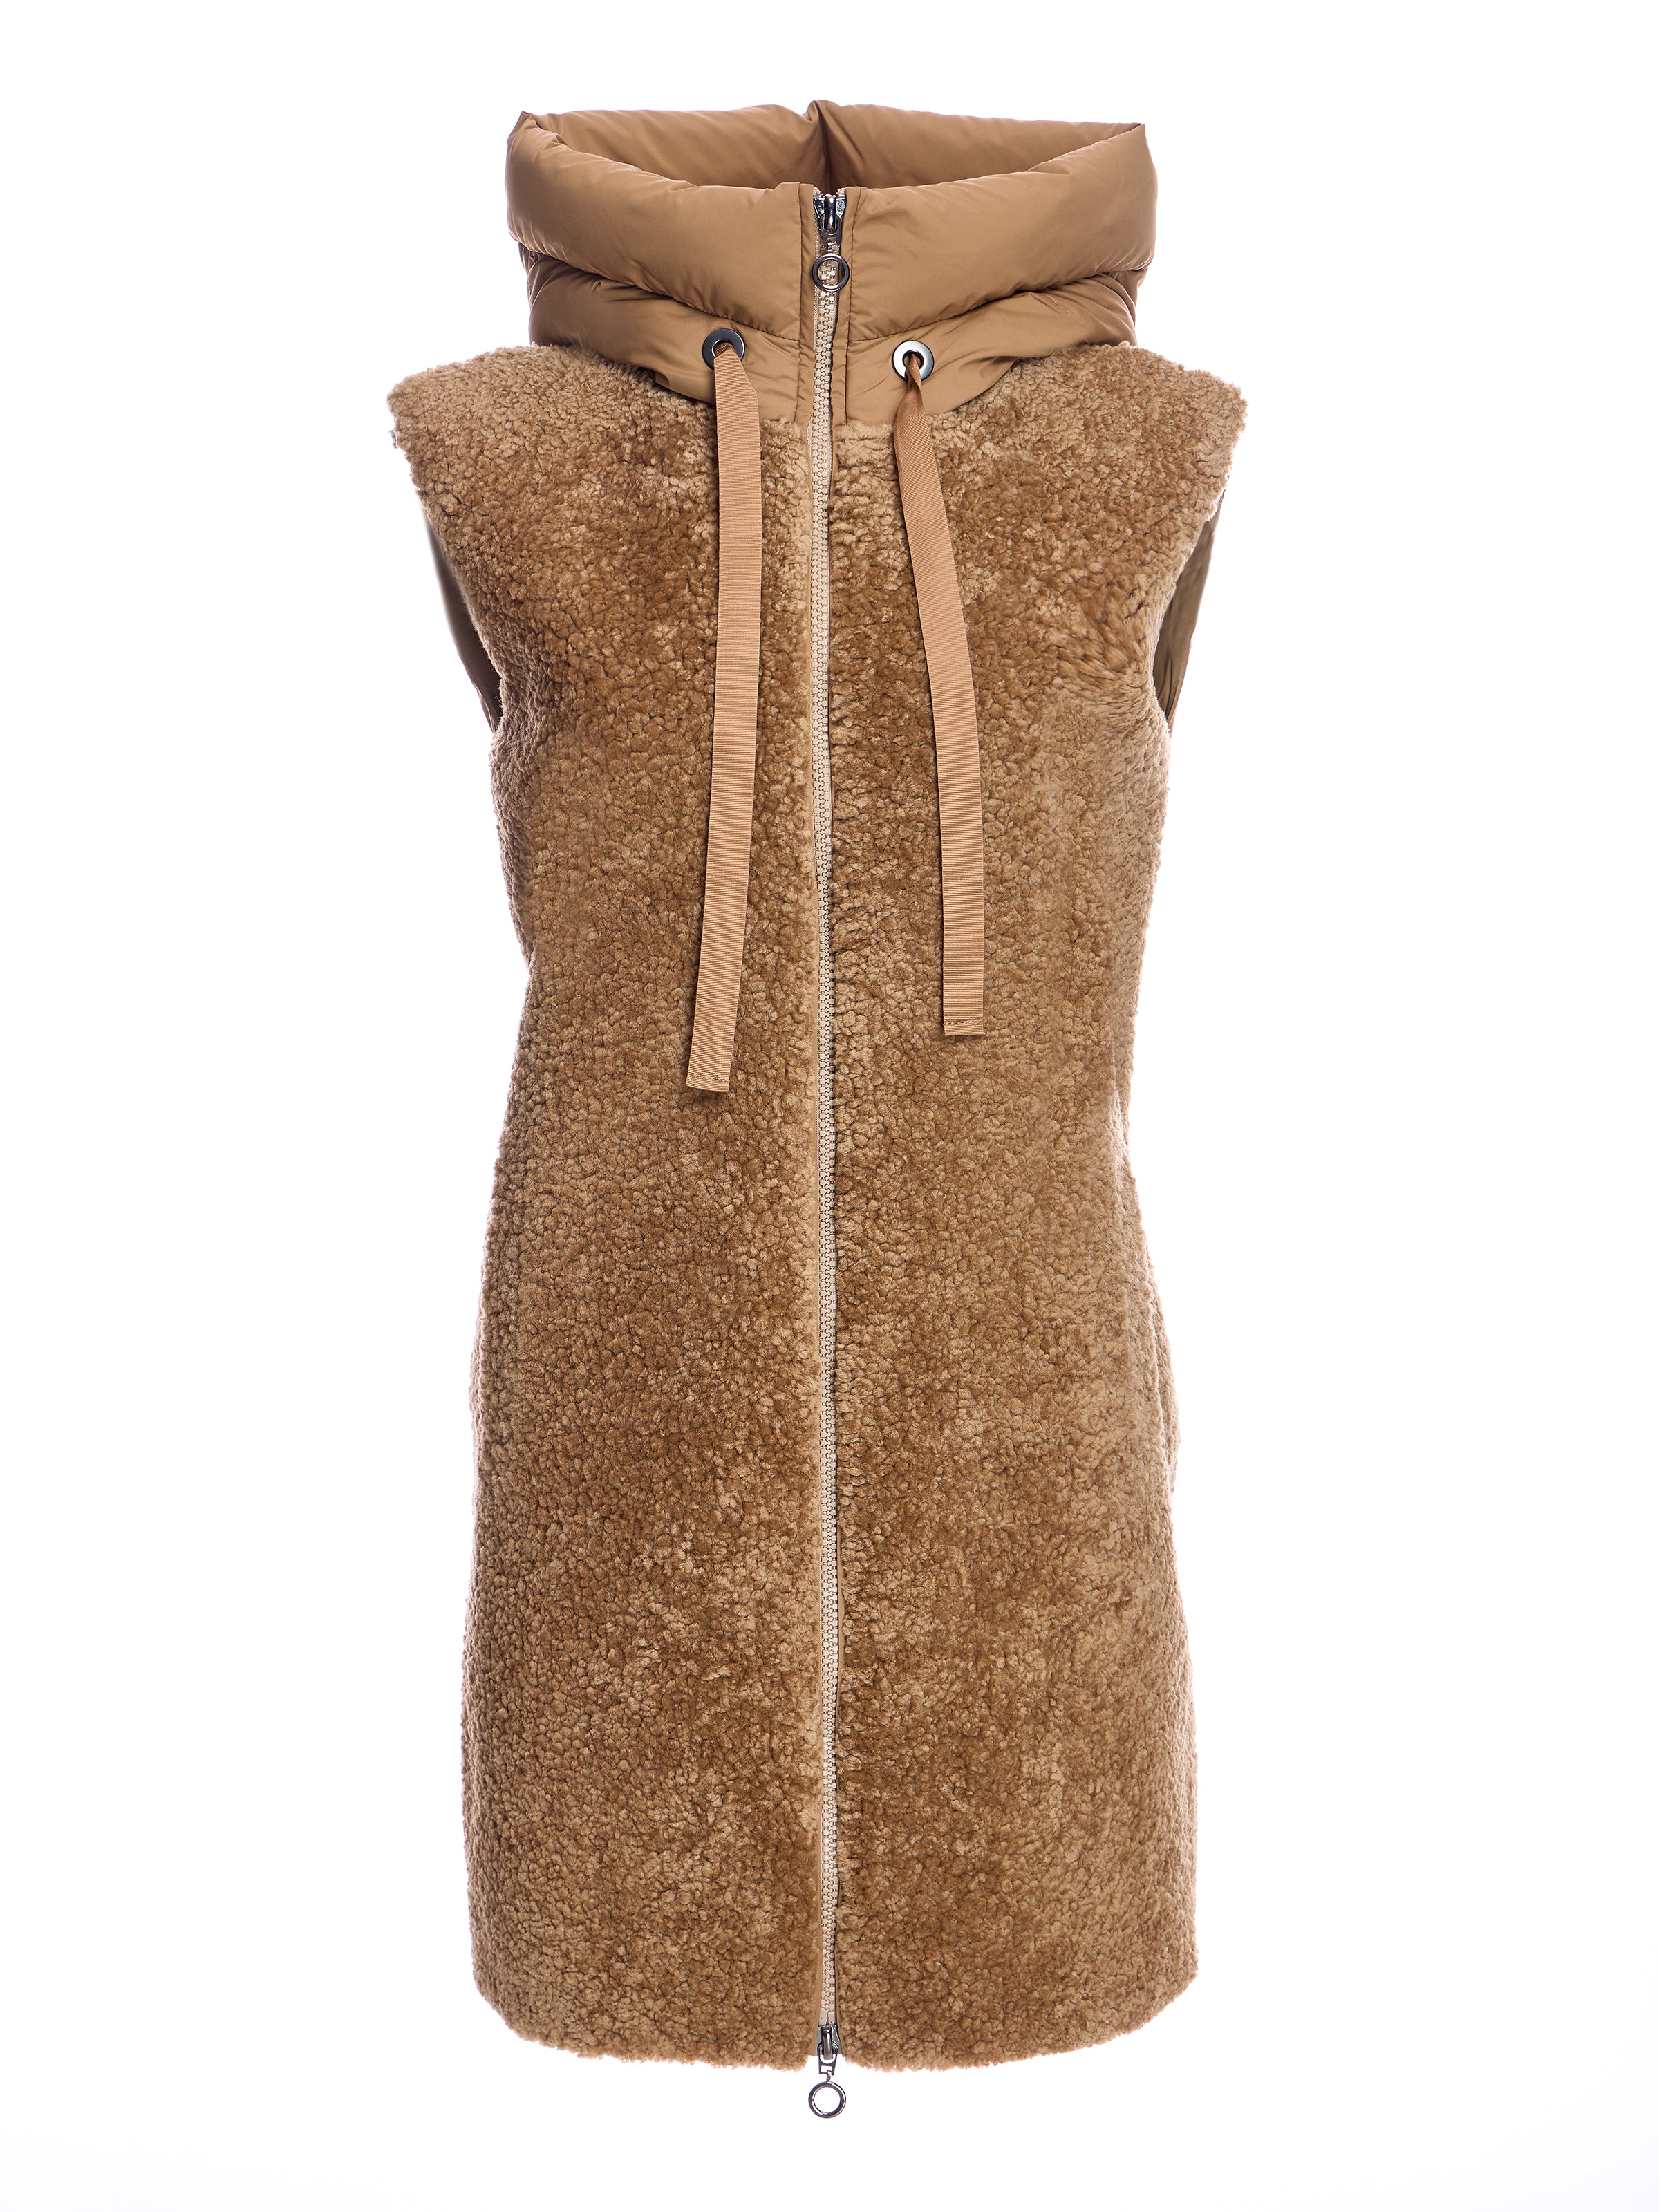 SHEARLING LAMB  VEST WITH QUILTED BACK AND HOOD